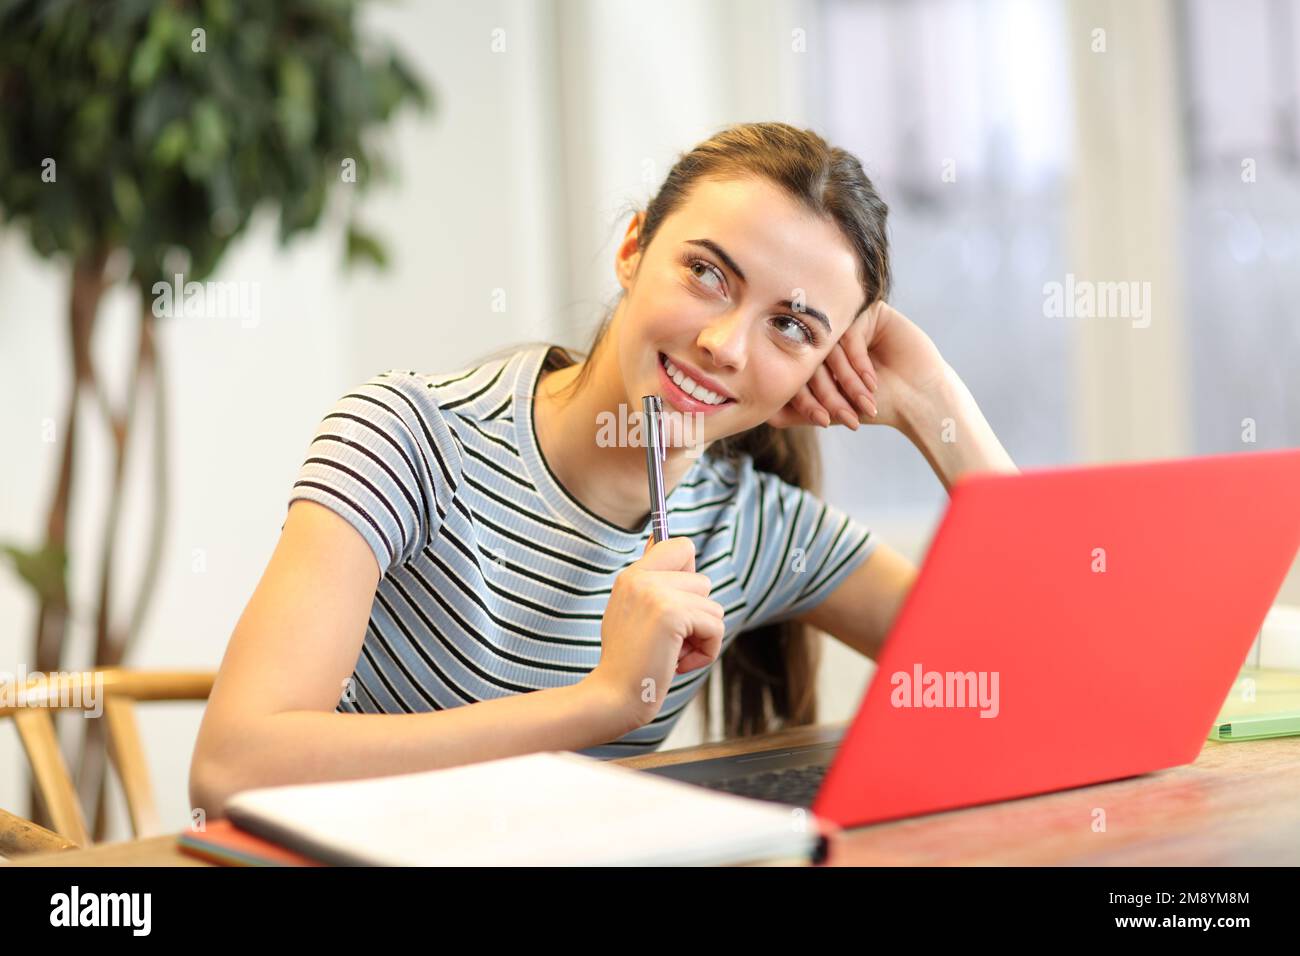 Student dreaming looking above with a laptop Stock Photo